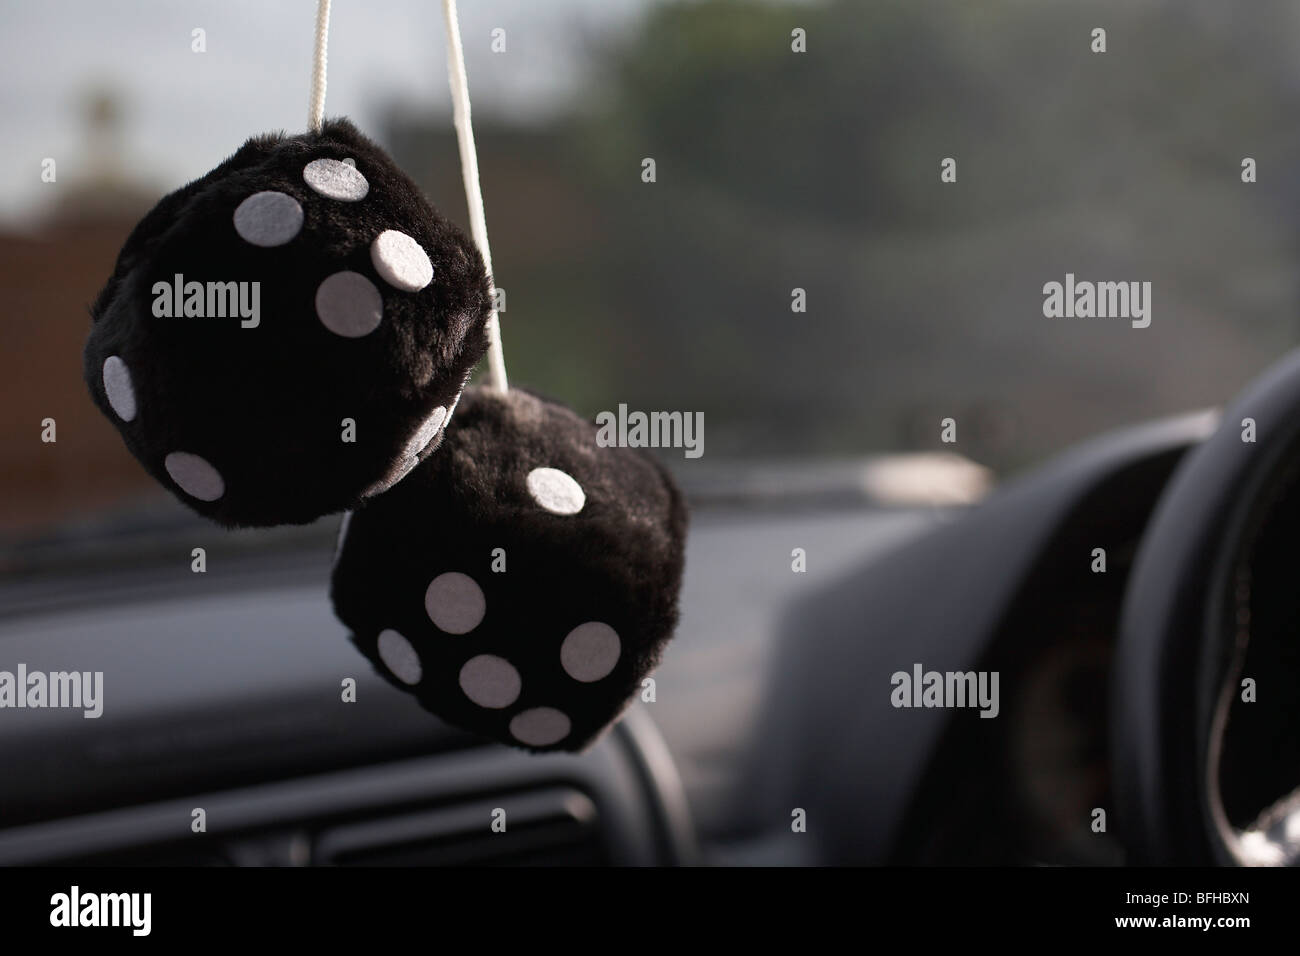 Furry dice hanging in car Stock Photo